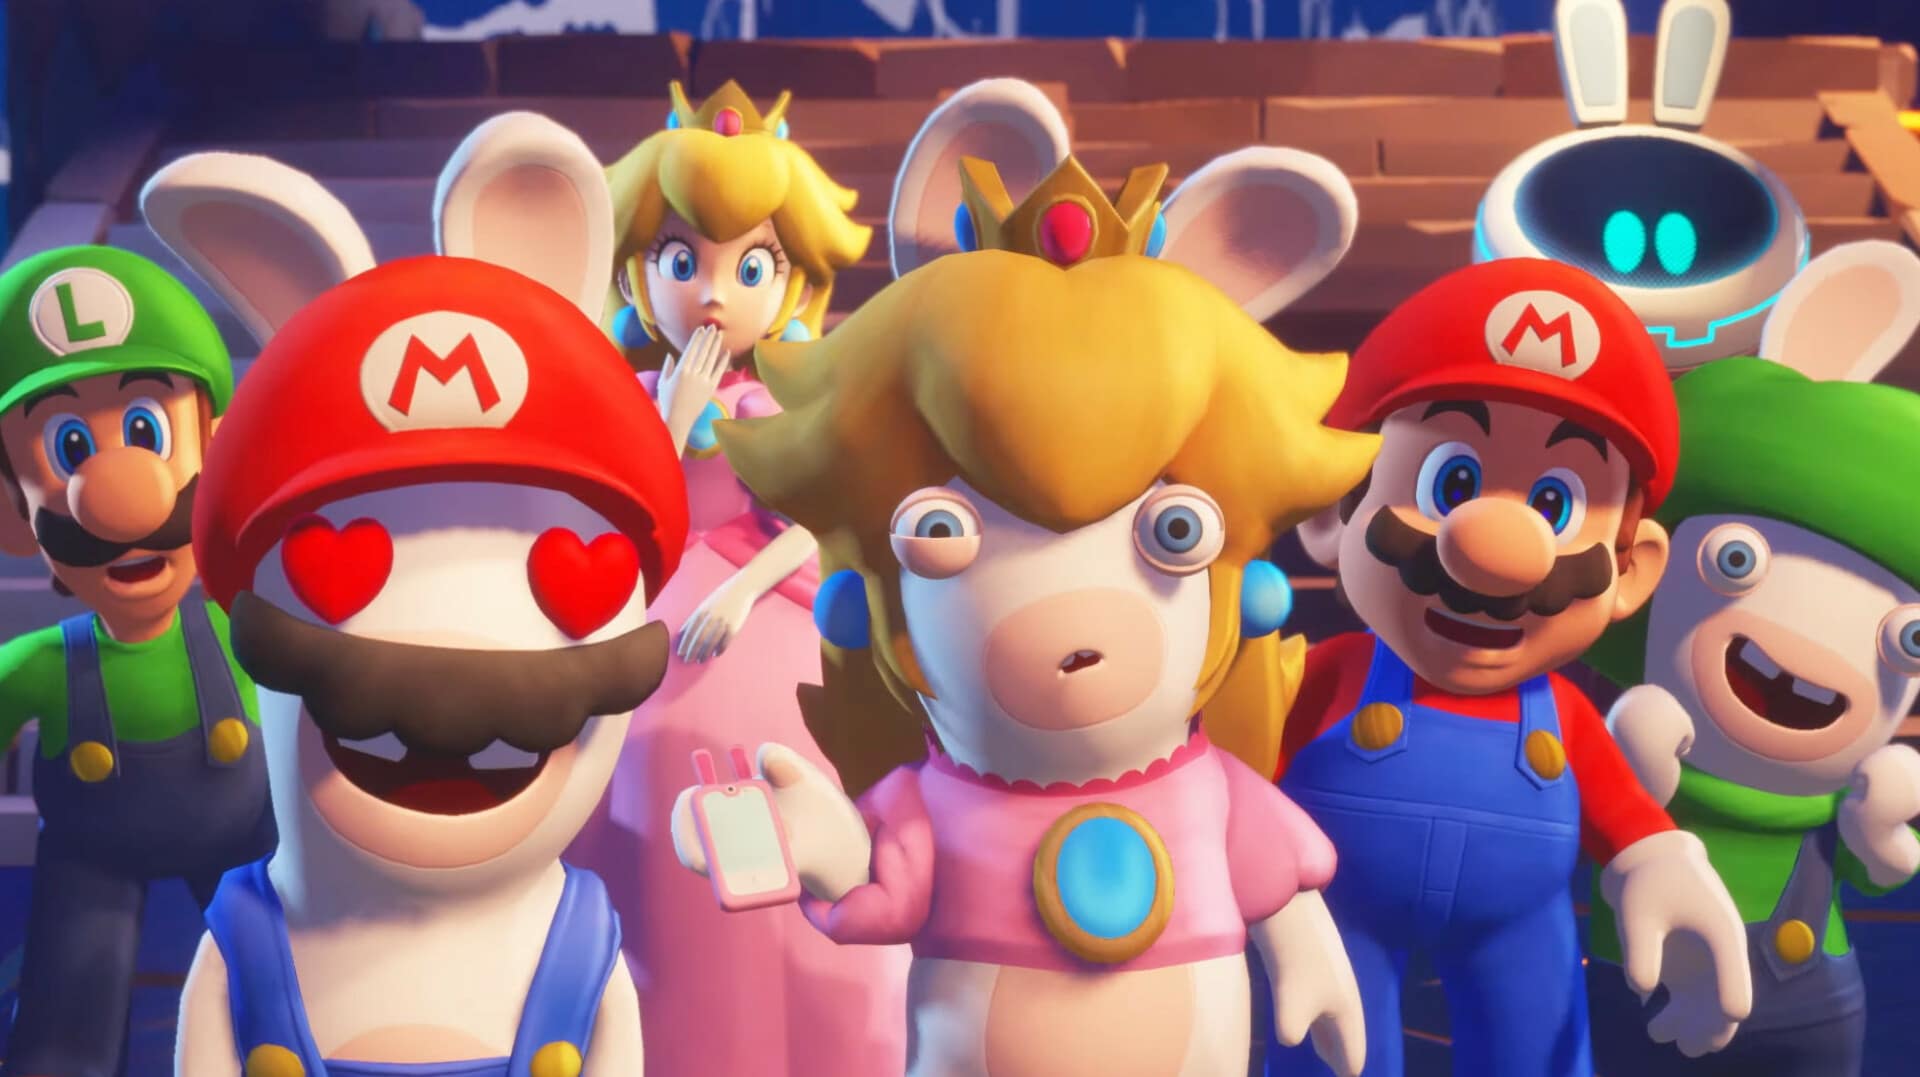 download mario and rabbids sparks of hope rayman dlc